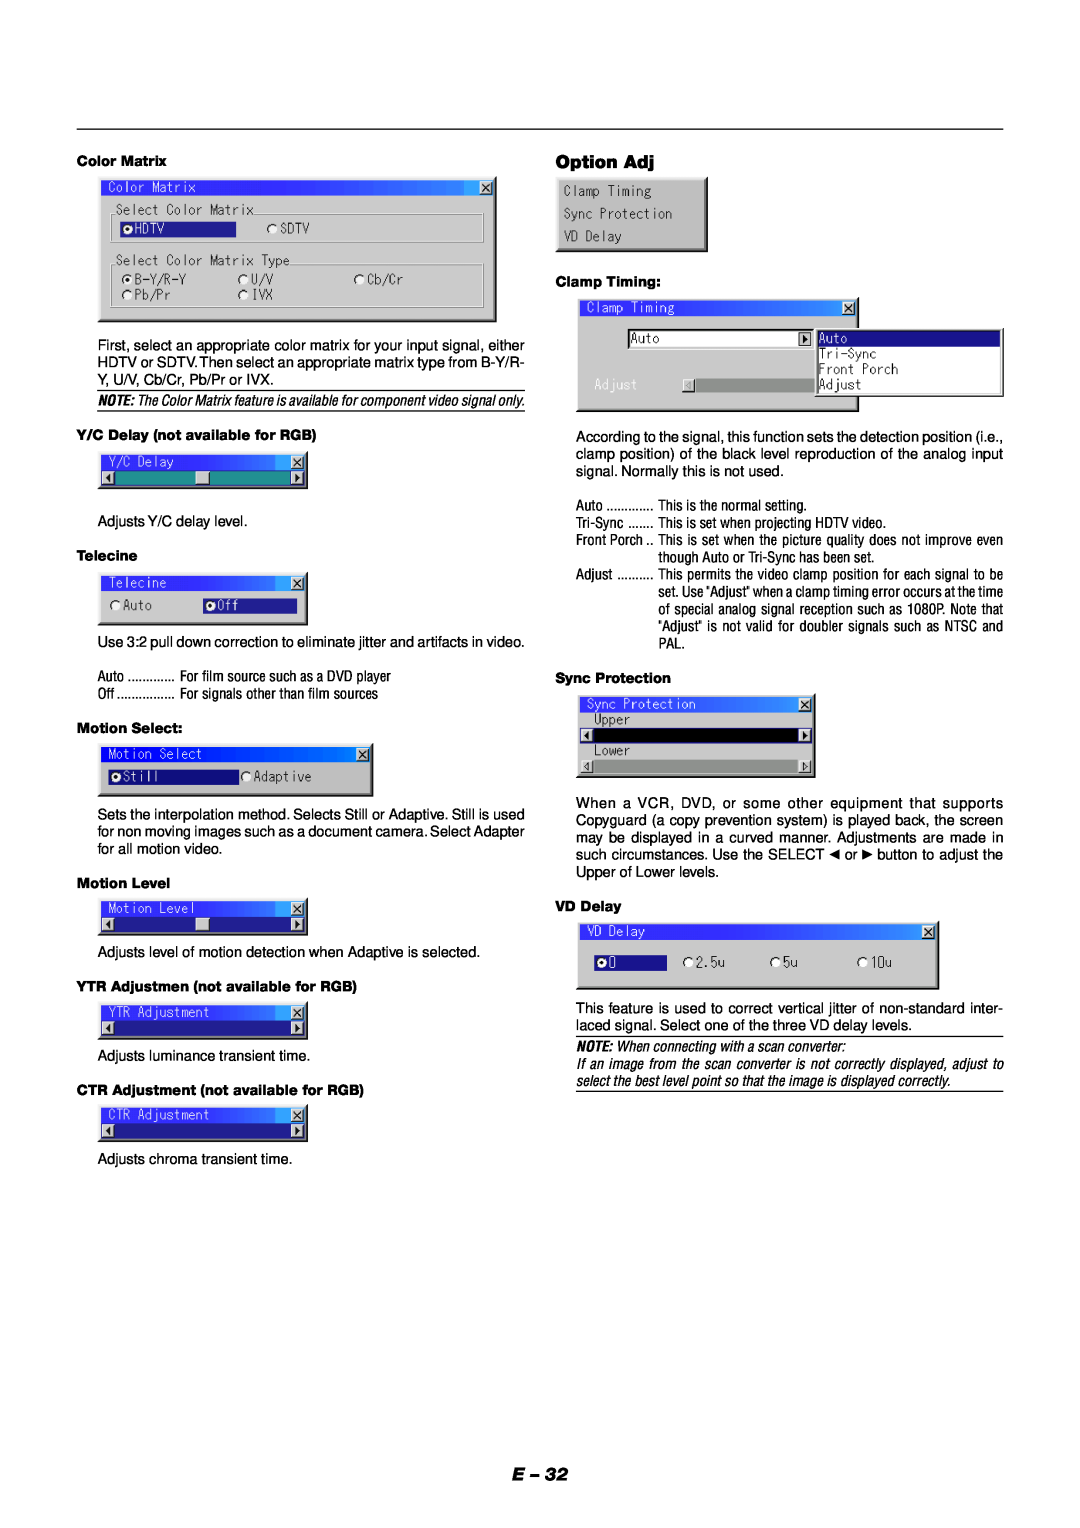 NEC XT9000 user manual Option Adj, NOTE When connecting with a scan converter 